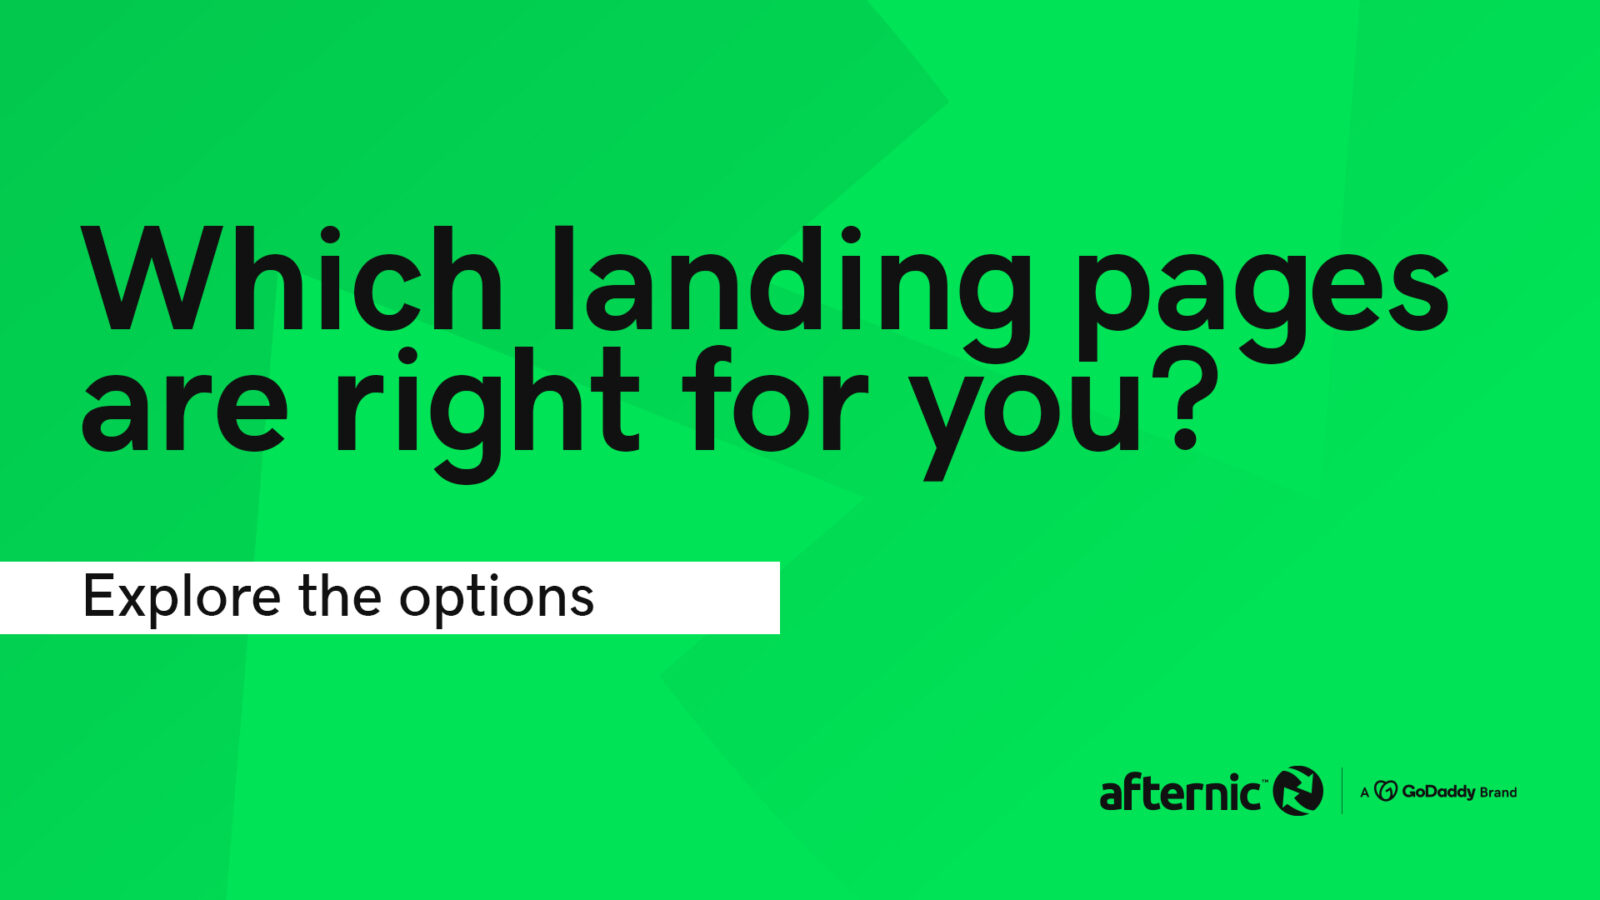 Which landing pages are right for you?